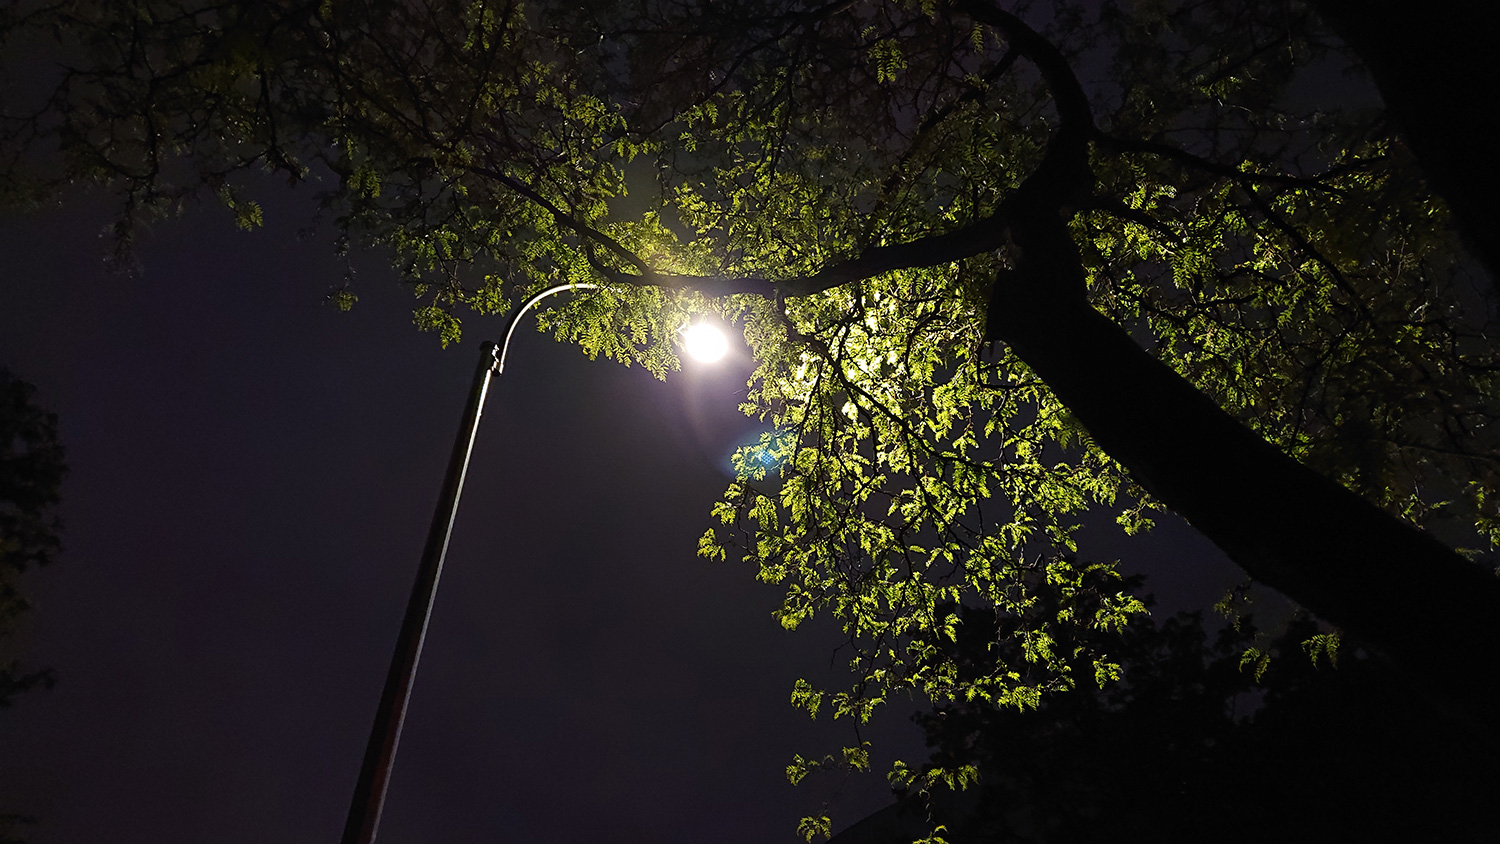 sony xperia xz2 review camera sample low light street lamp